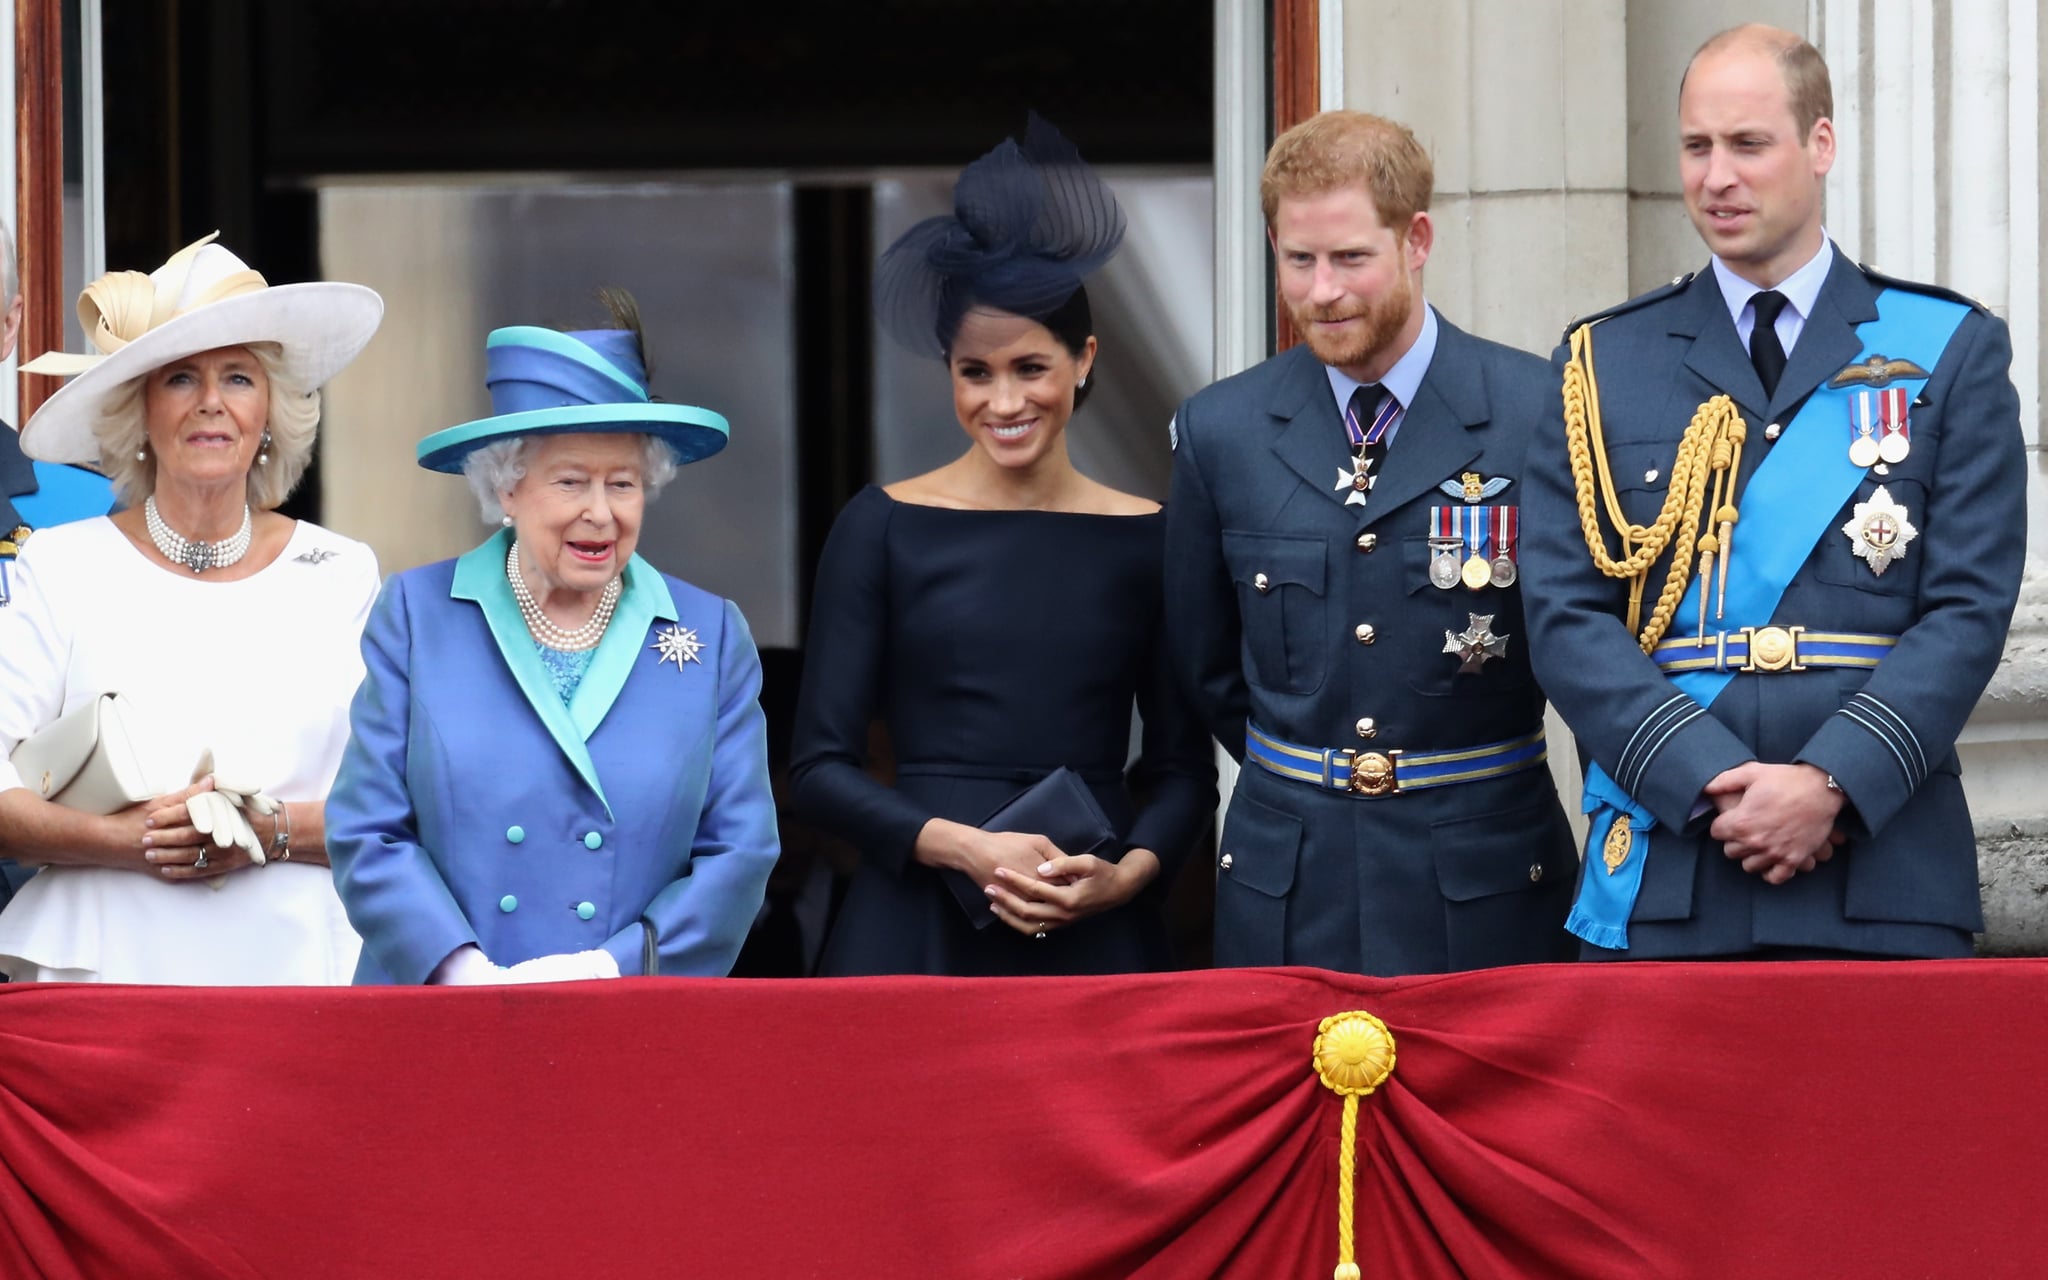 LONDON, ENGLAND - JULY 10:  (L-R) Prince Charles, Prince of Wales, Prince Andrew, Duke of York, Camilla, Duchess of Cornwall, Queen Elizabeth II, Meghan, Duchess of Sussex, Prince Harry, Duke of Sussex, Prince William, Duke of Cambridge and Catherine, Duchess of Cambridge watch the RAF flypast on the balcony of Buckingham Palace, as members of the Royal Family attend events to mark the centenary of the RAF on July 10, 2018 in London, England.  (Photo by Chris Jackson/Getty Images)